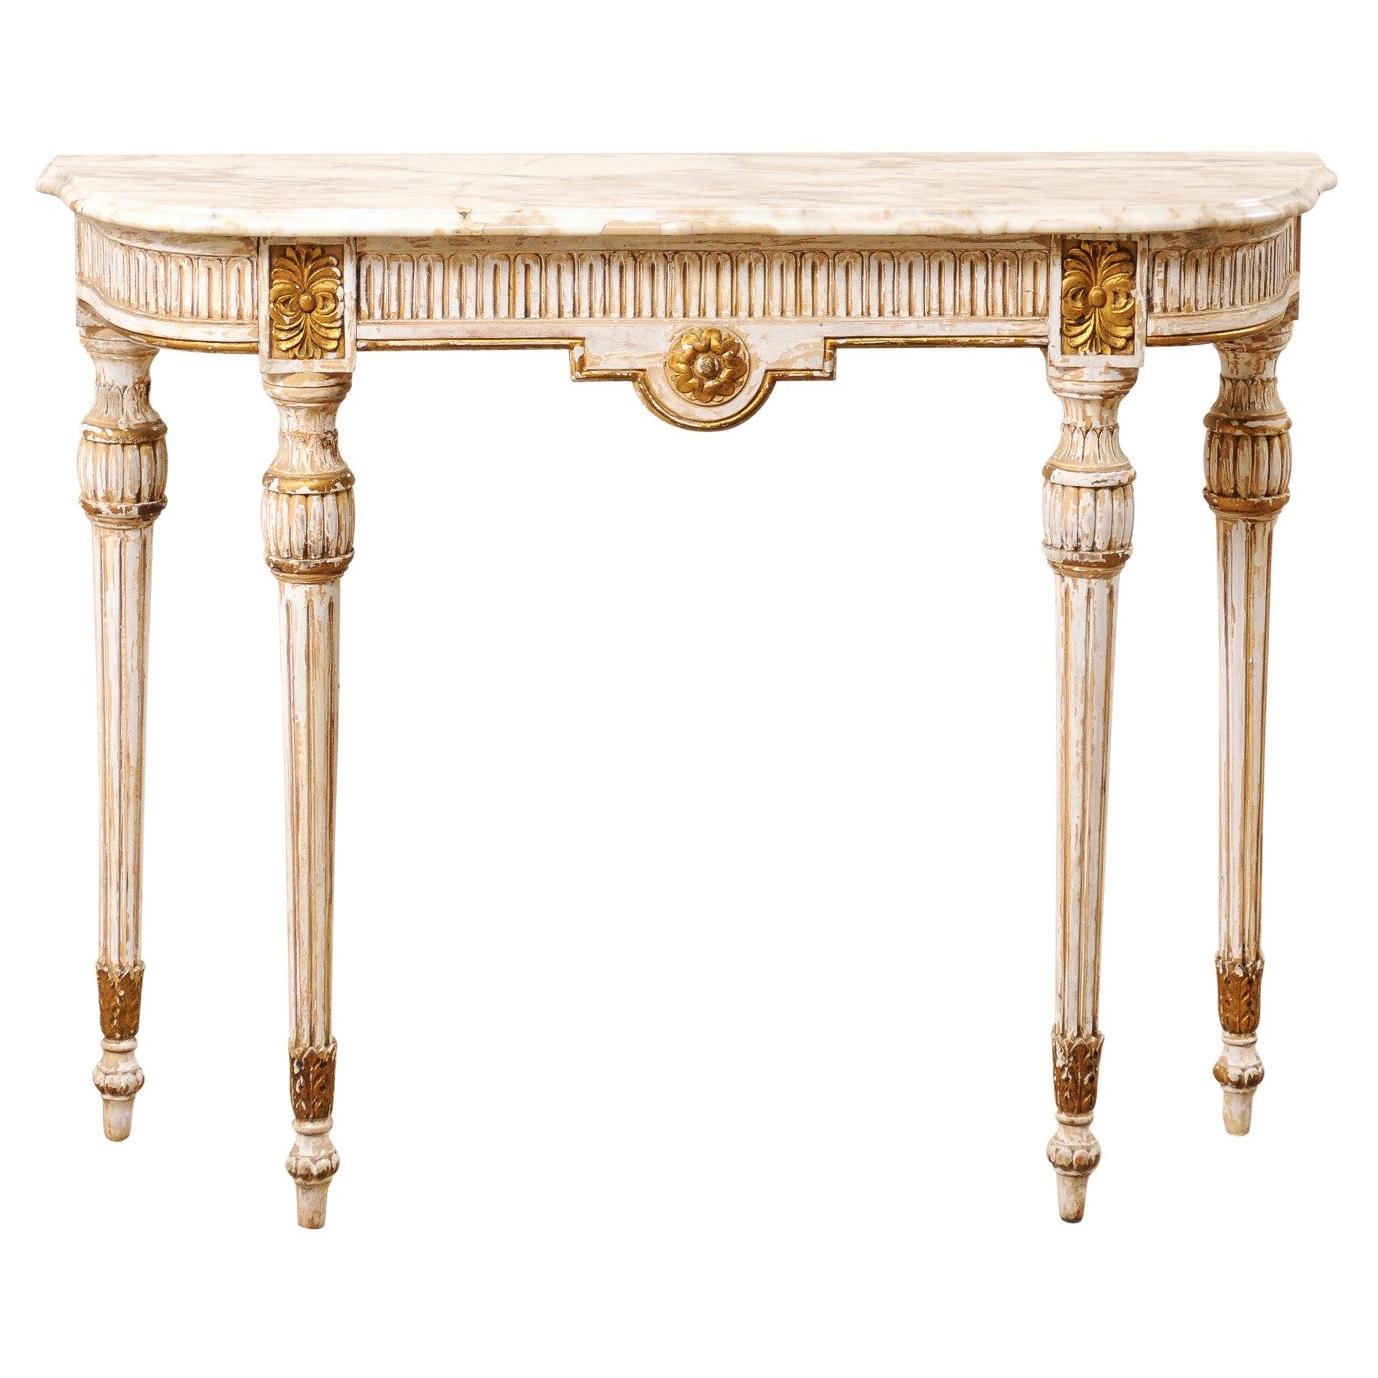 Italian Carved & Gilt Wood Console Table w/ Marble Top, Mid 20th Century